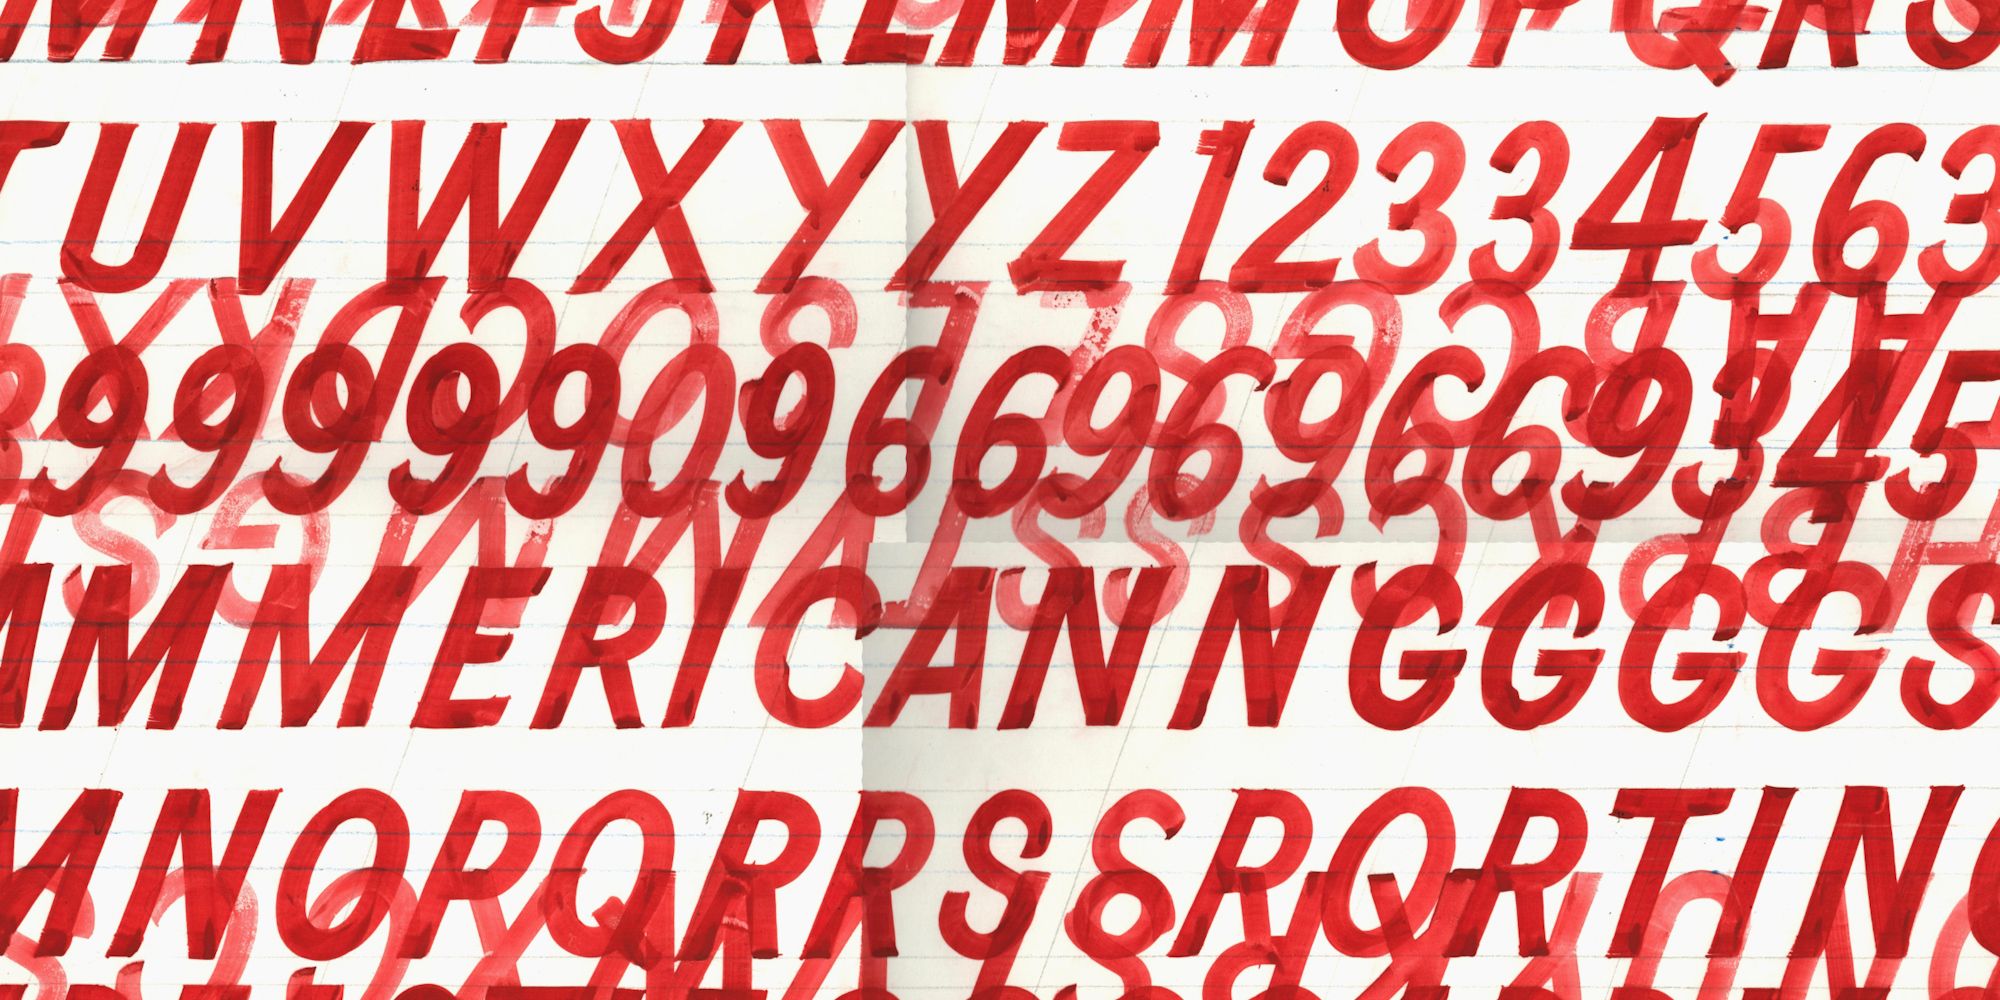 Close-up of overlapping letters and numerals painted in red.